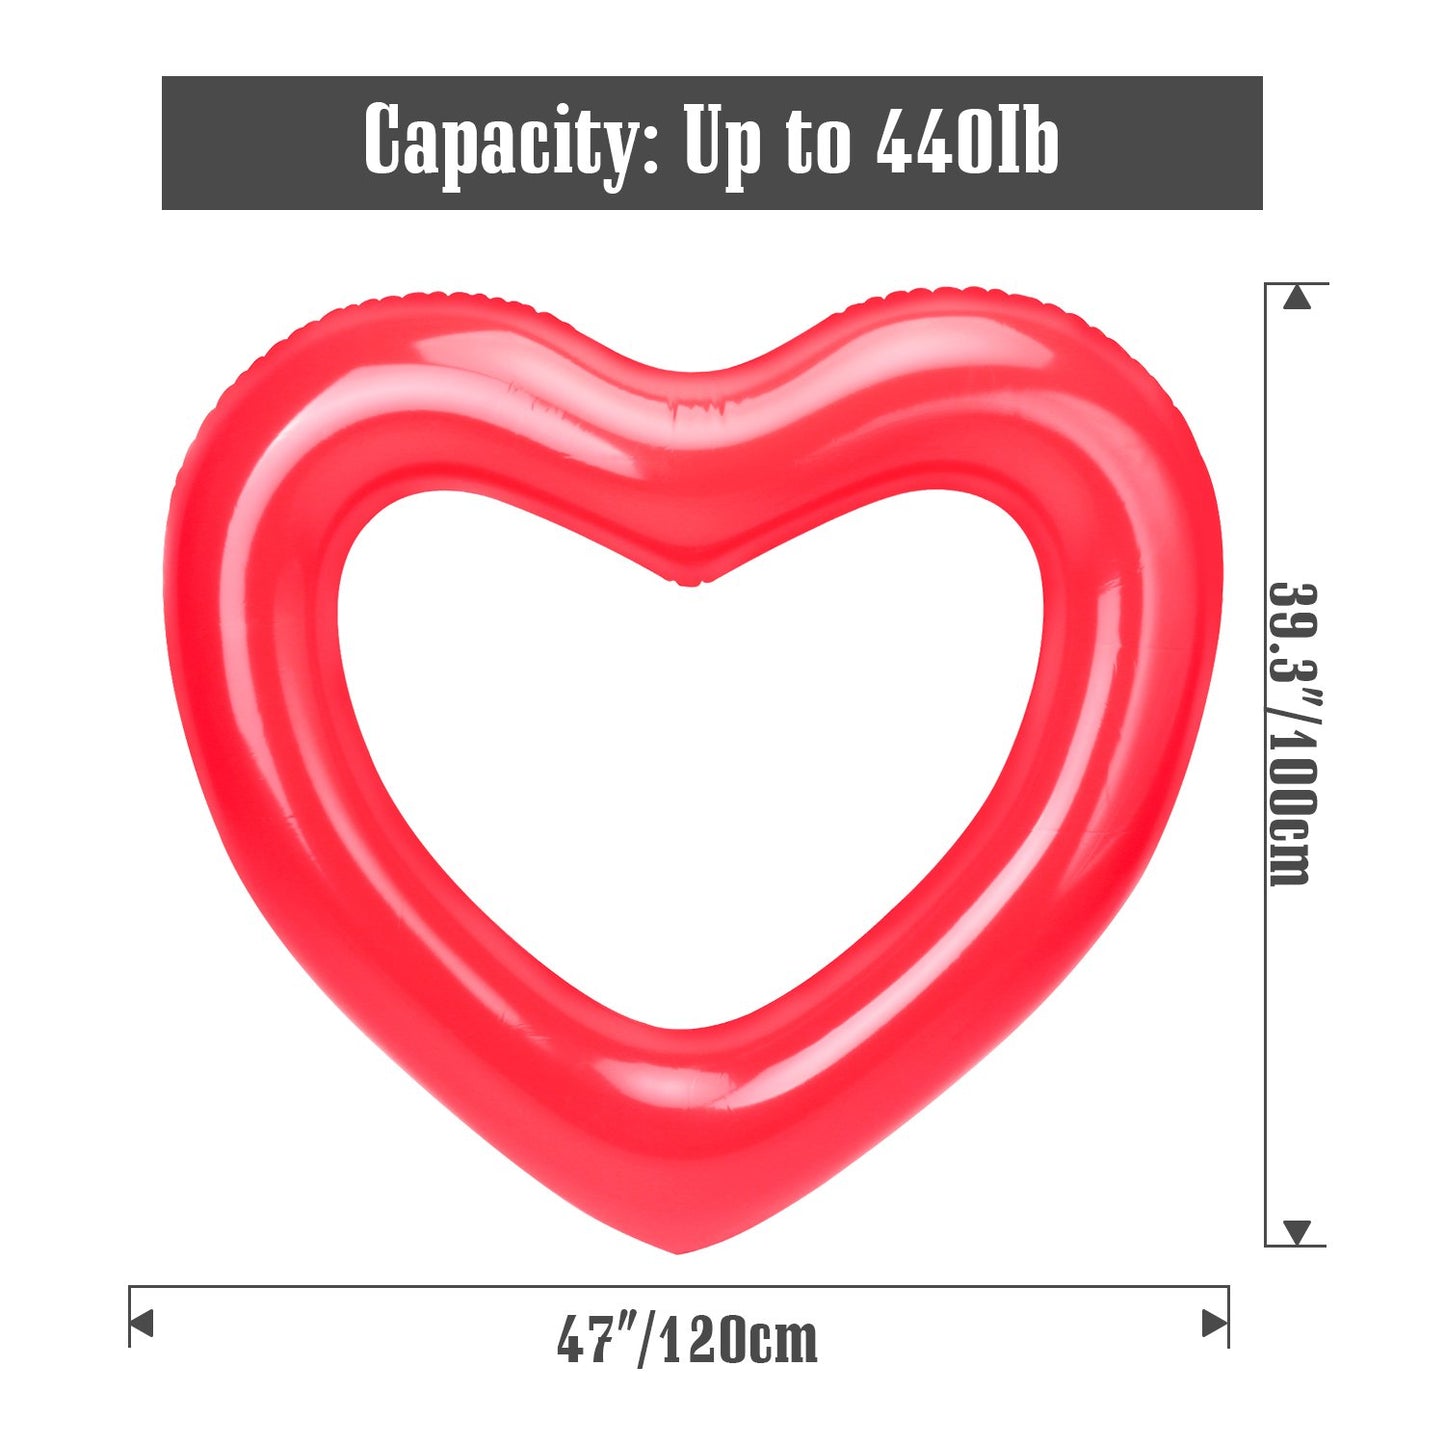 MoKo Inflatable Pool Float for Kids Adults, Clearance Heart Shaped Swim Ring 120cm Diameter Summer Swimming Tube Water Fun Beach Party Pool Toys Swimming Circle Red